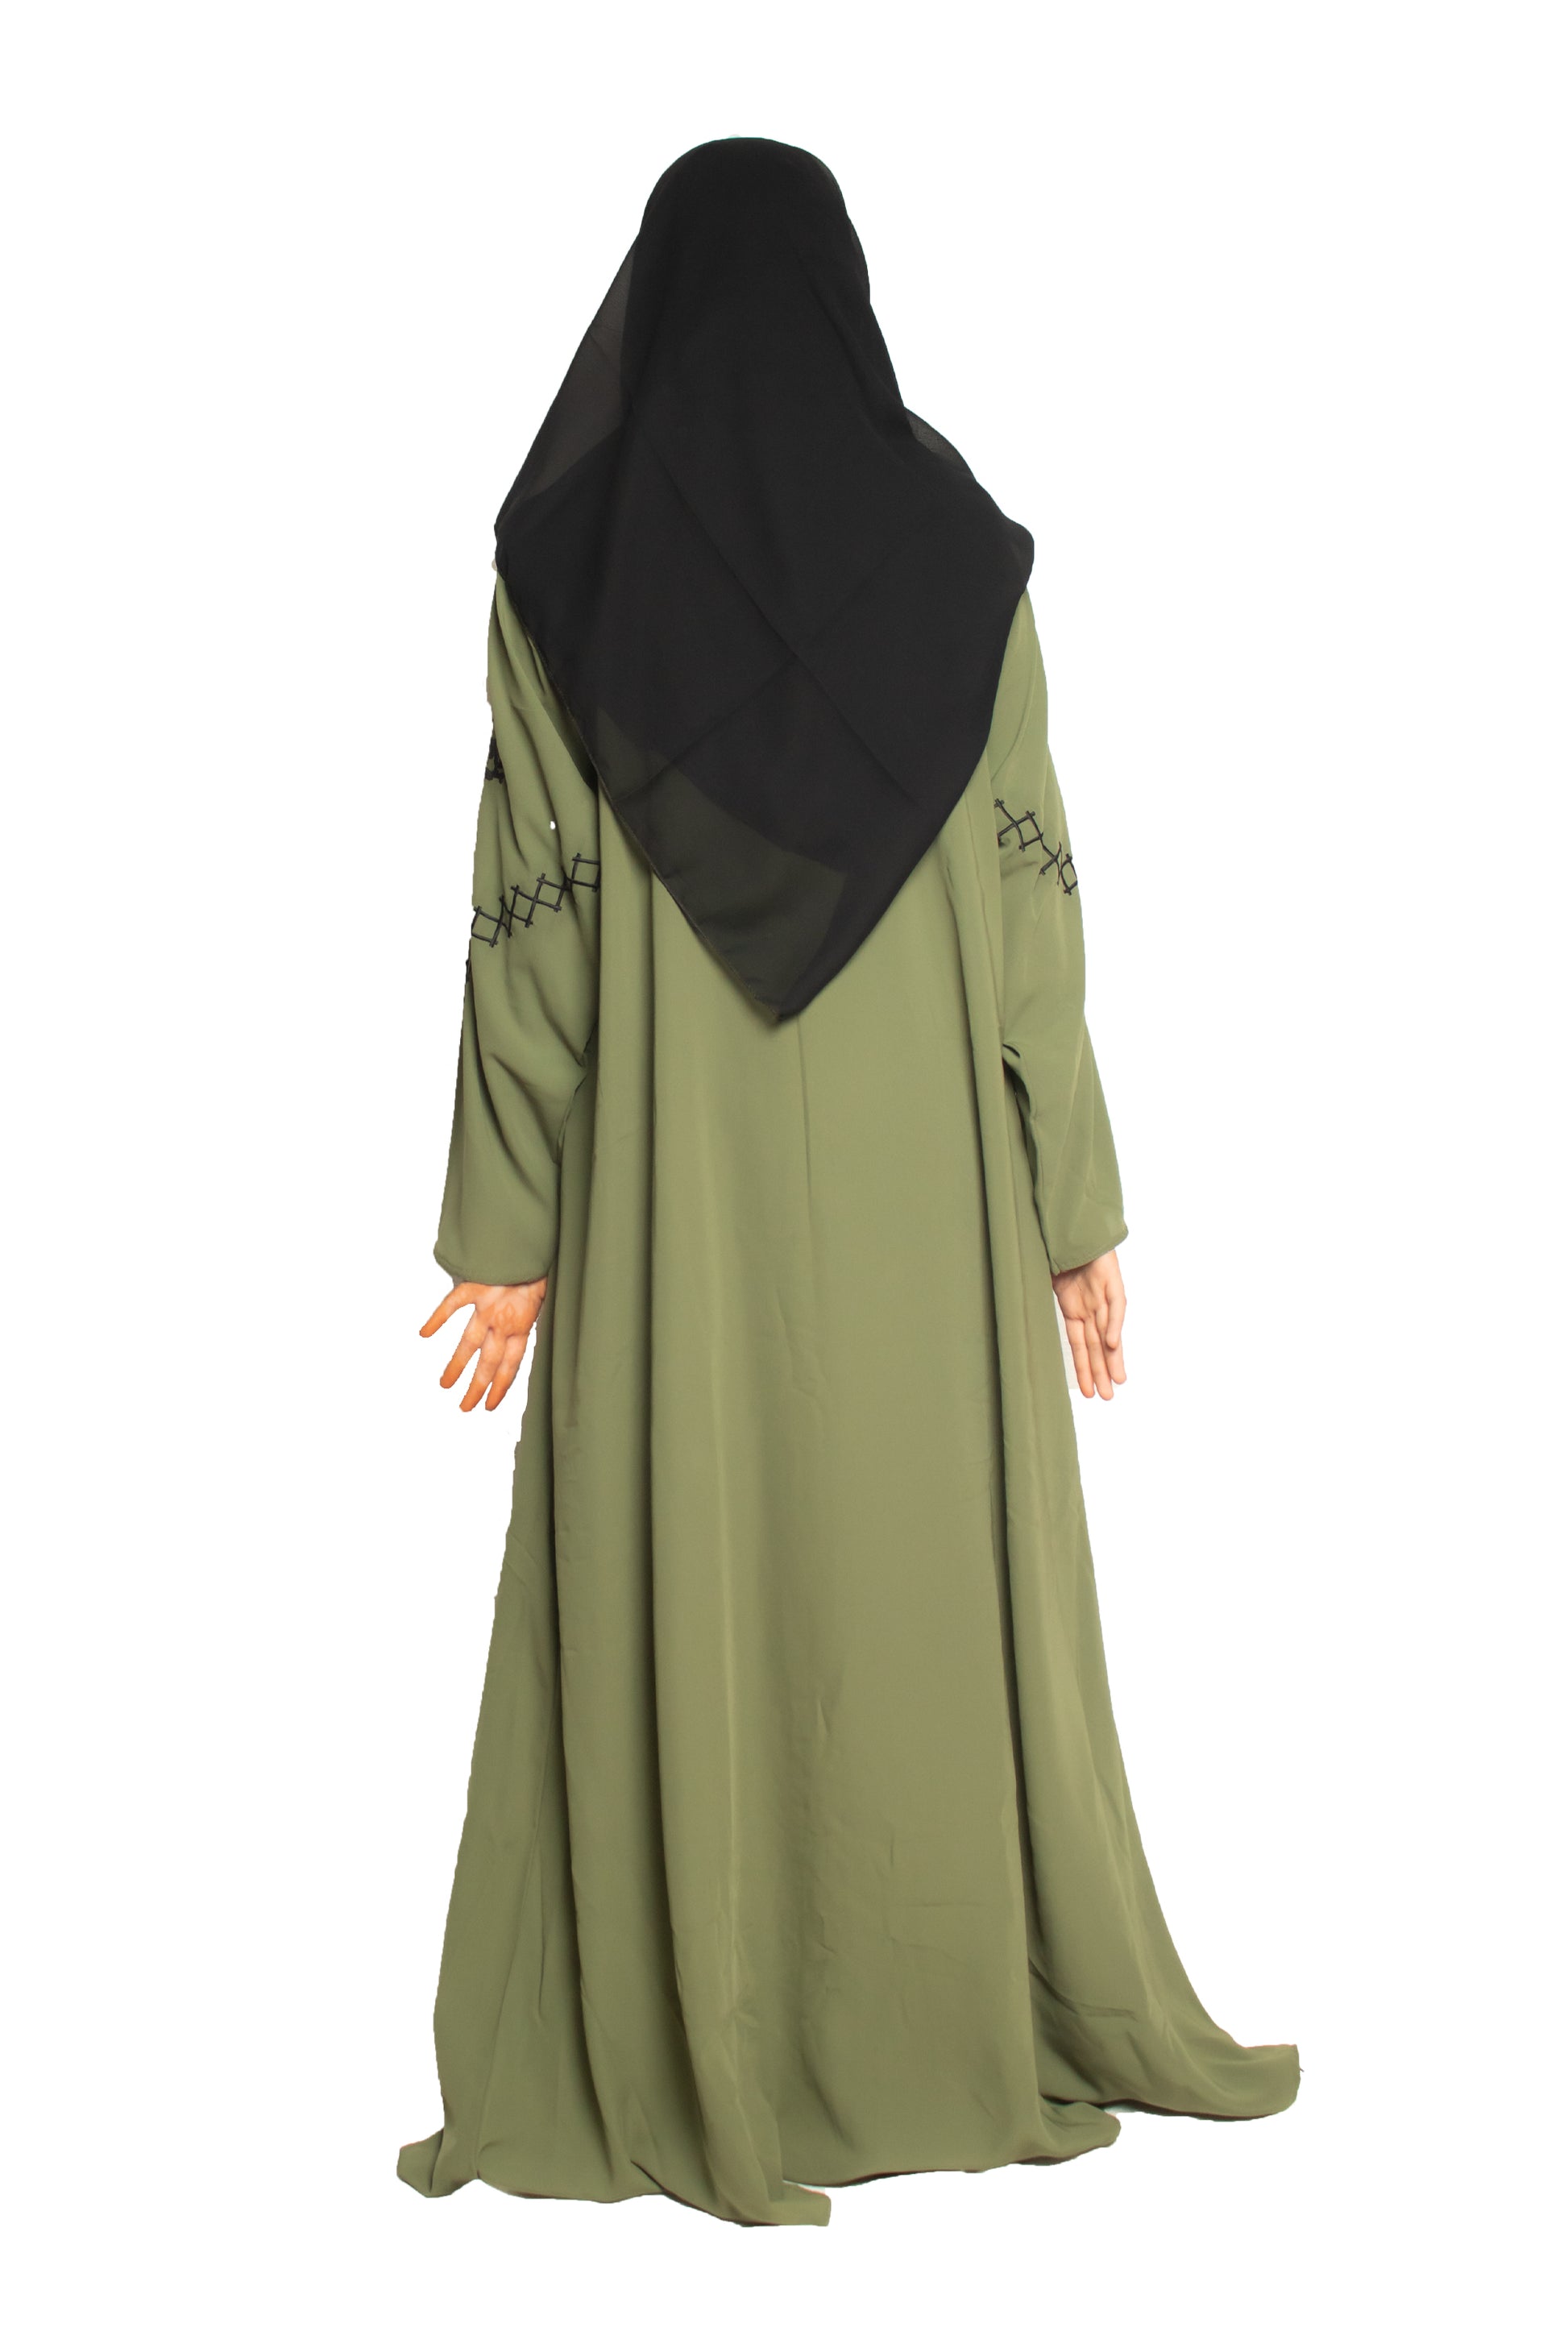 Modest City Self Design Front Open Zip Embroidered Green Crepe Fabric Abaya or Burqa with Hijab for Women & Girls-Series Laiba